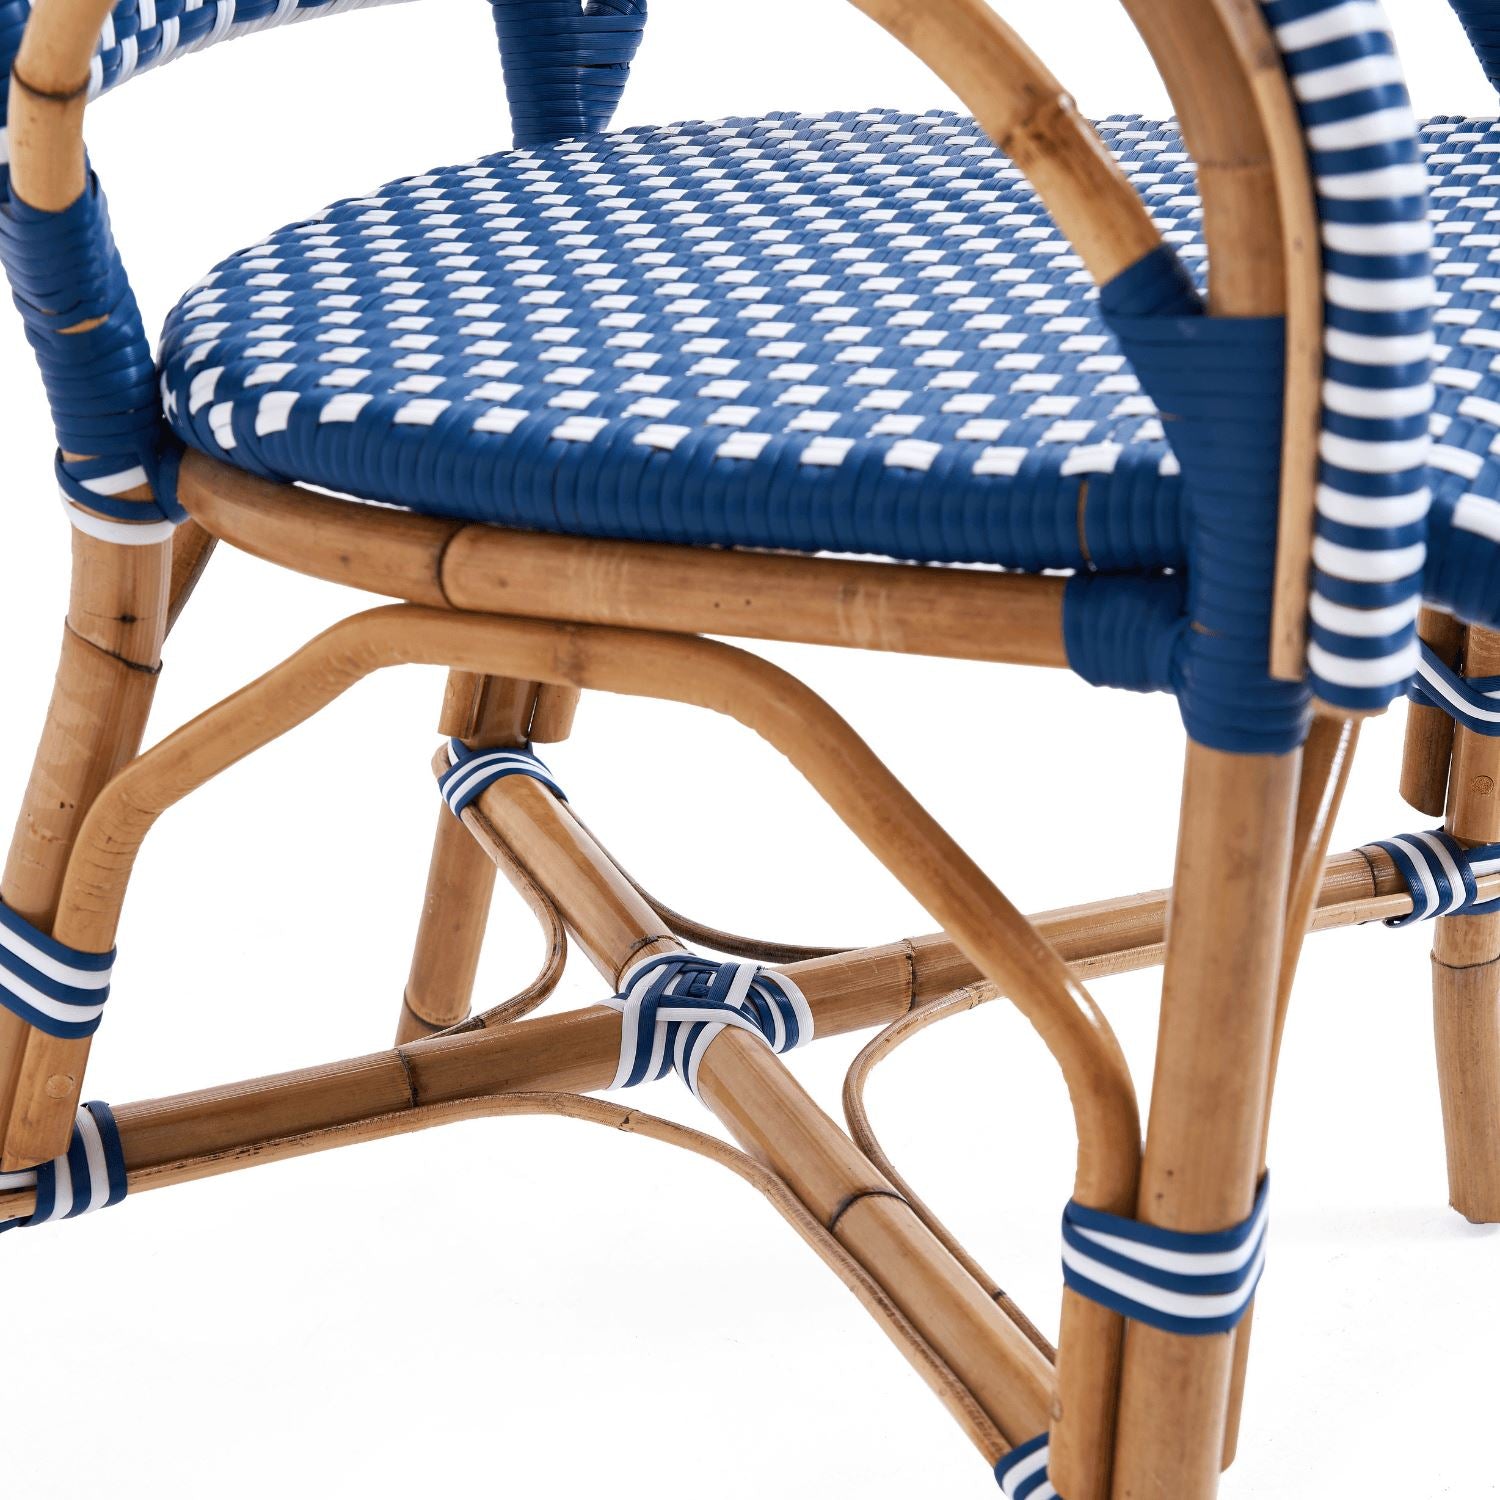 Lillyme Armchair - Valyou 